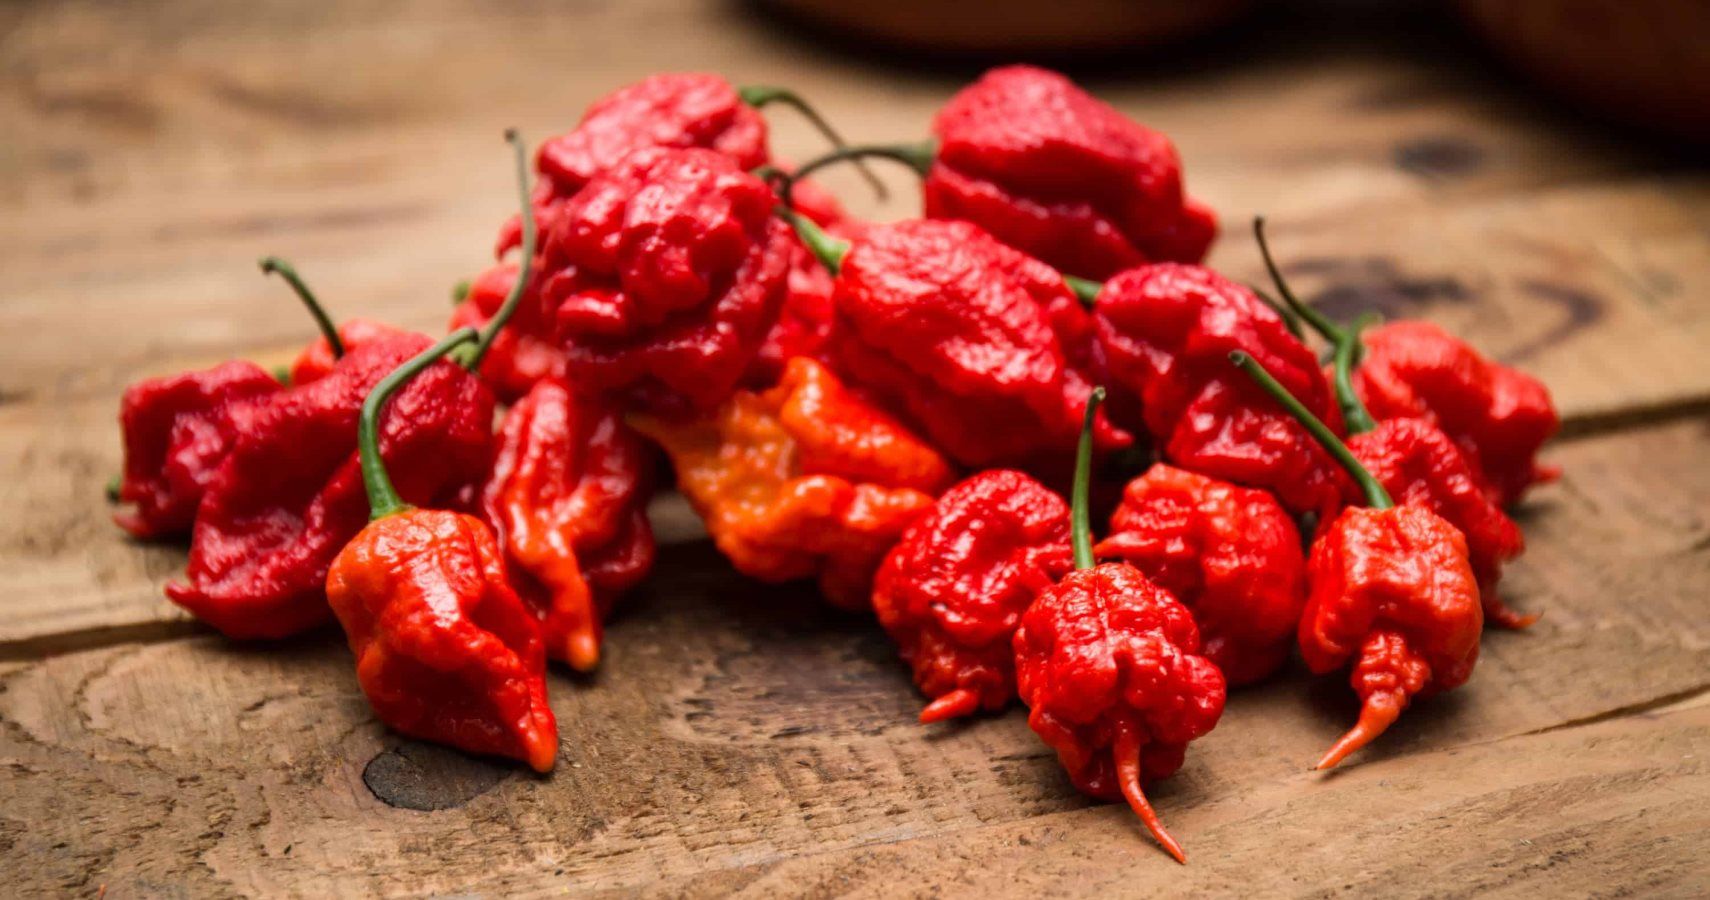 World’s Hottest Pepper Will Burn Your Mouth And Give You A Headache